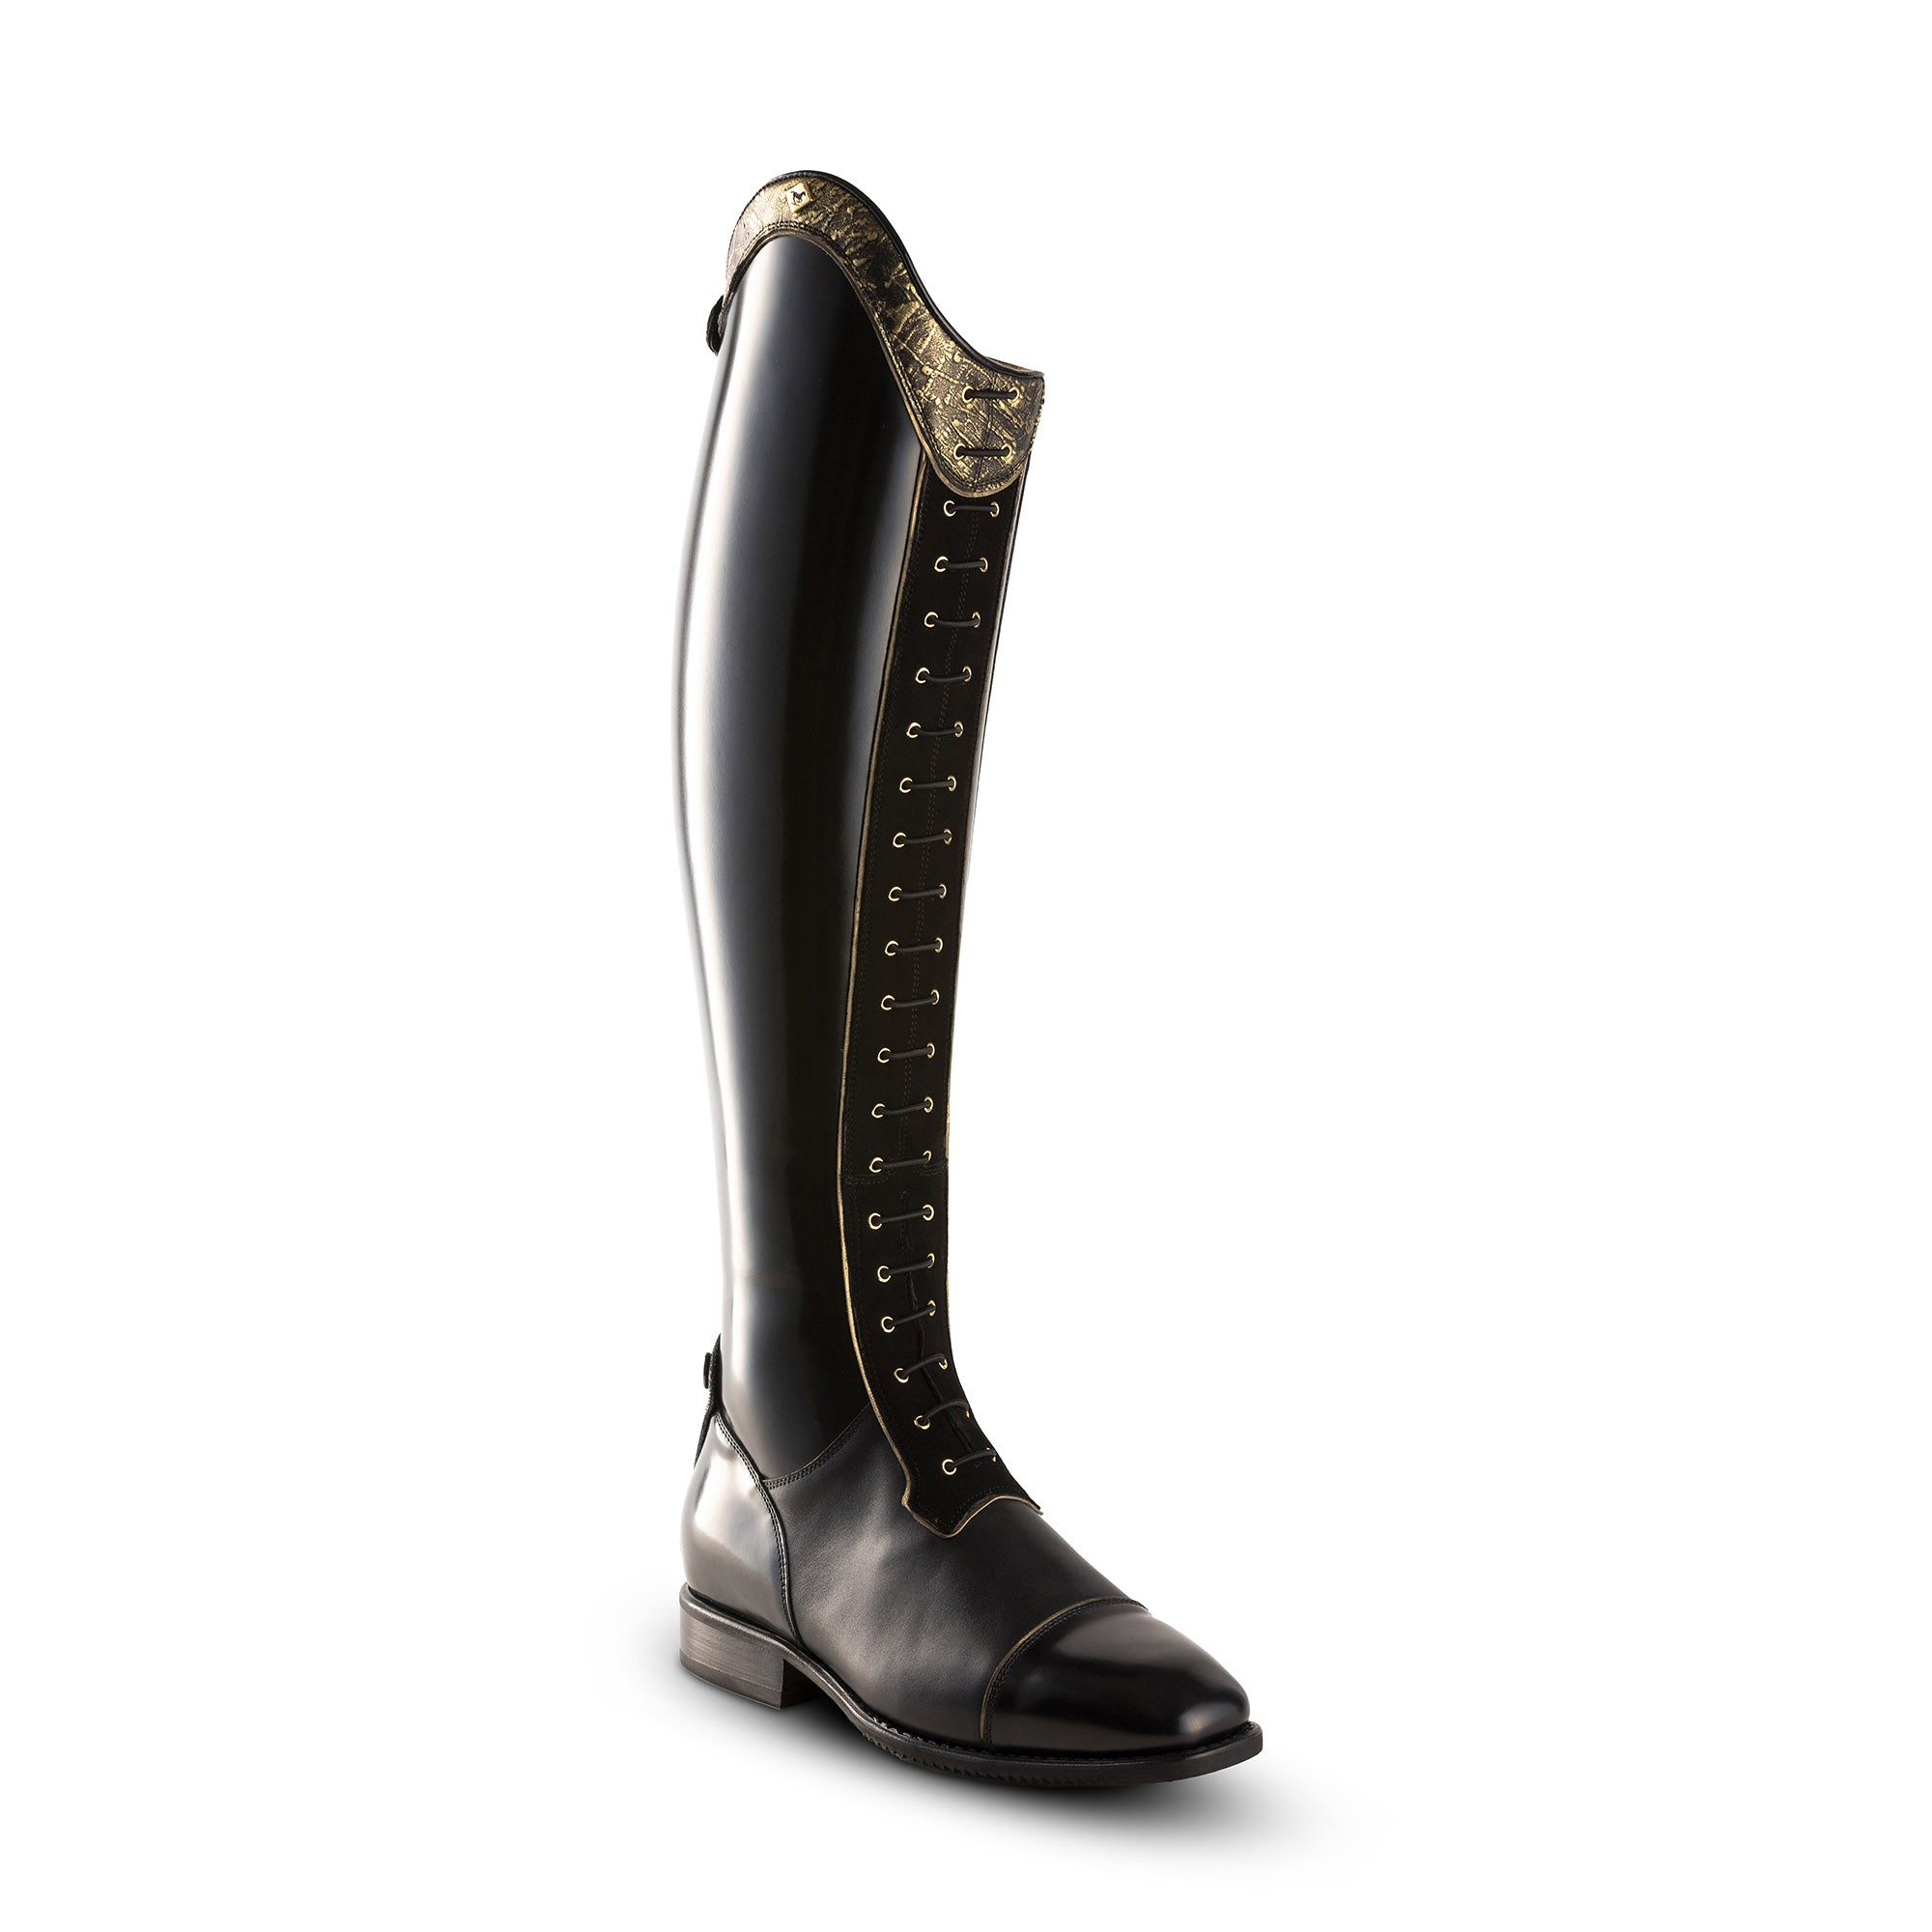 Gee Gee Equine DeNiro S36T03 Tall Boot Graffiti collection - Stylish Equestrian Footwear